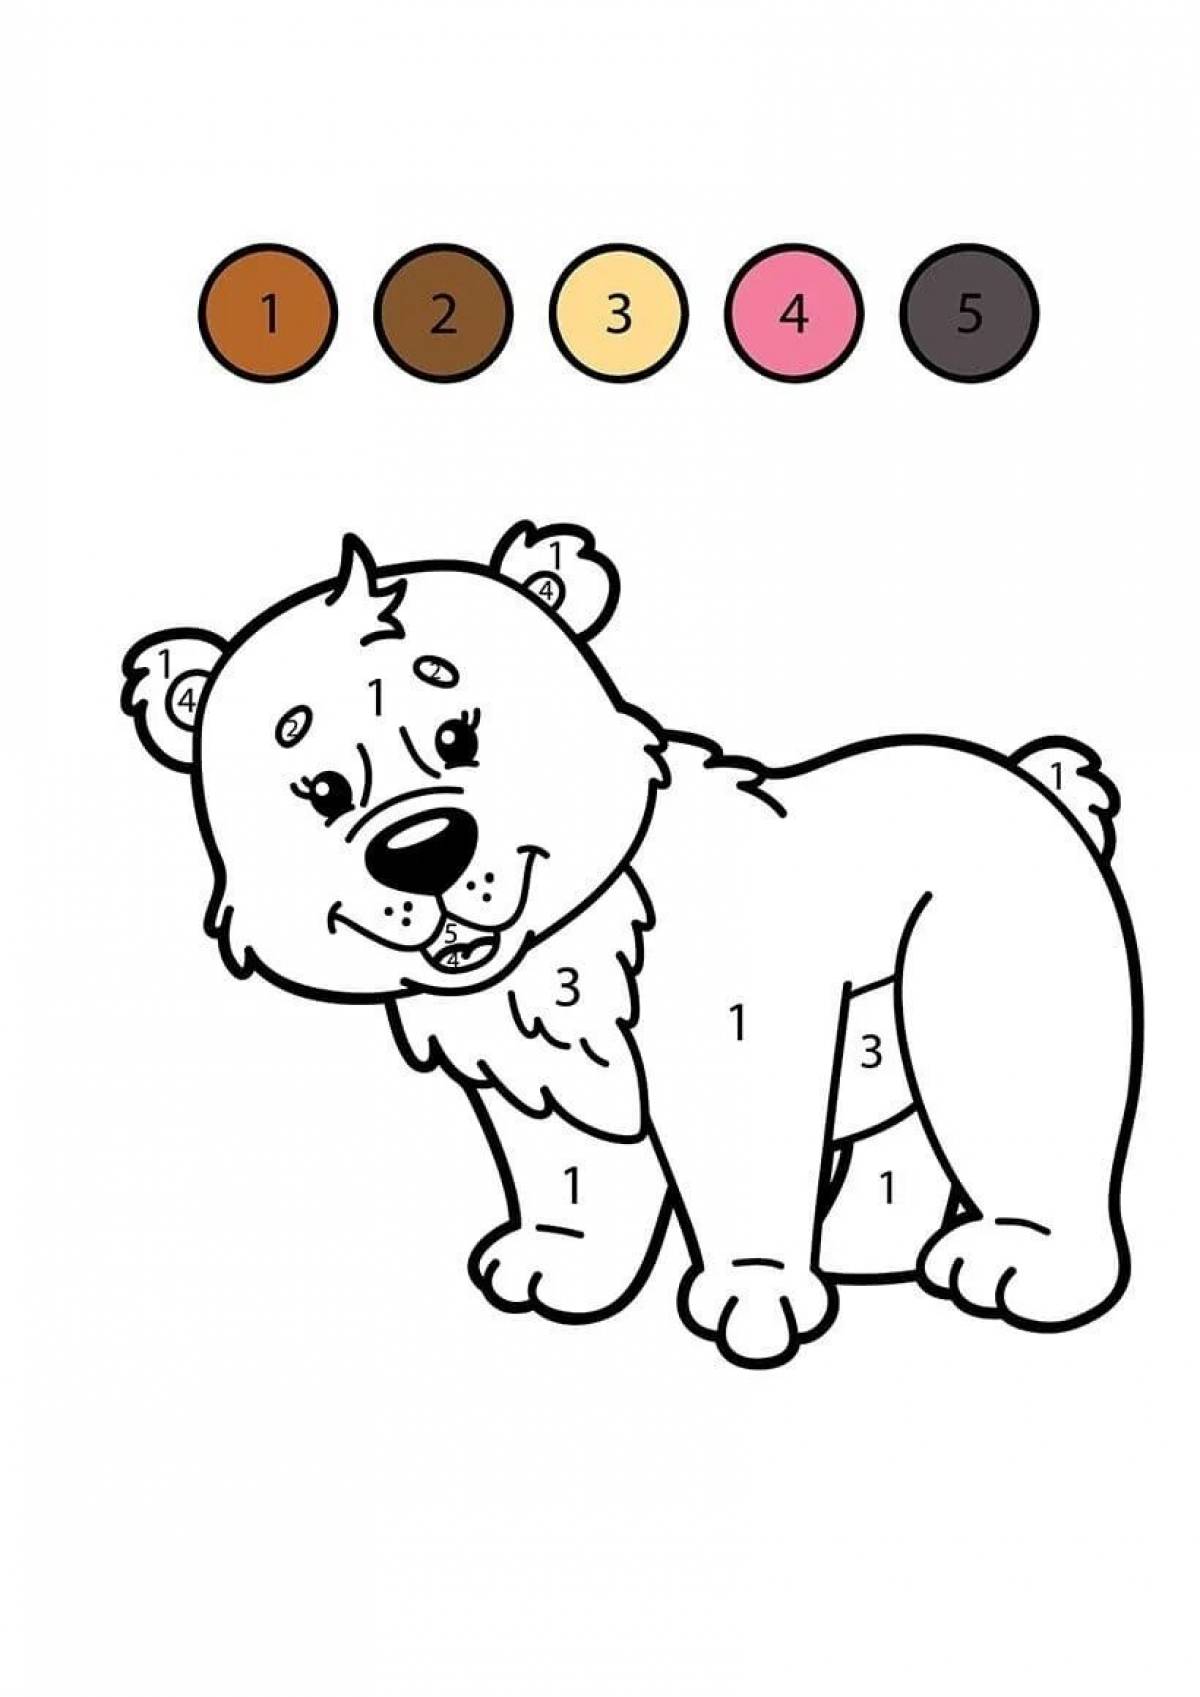 Bear by numbers #4